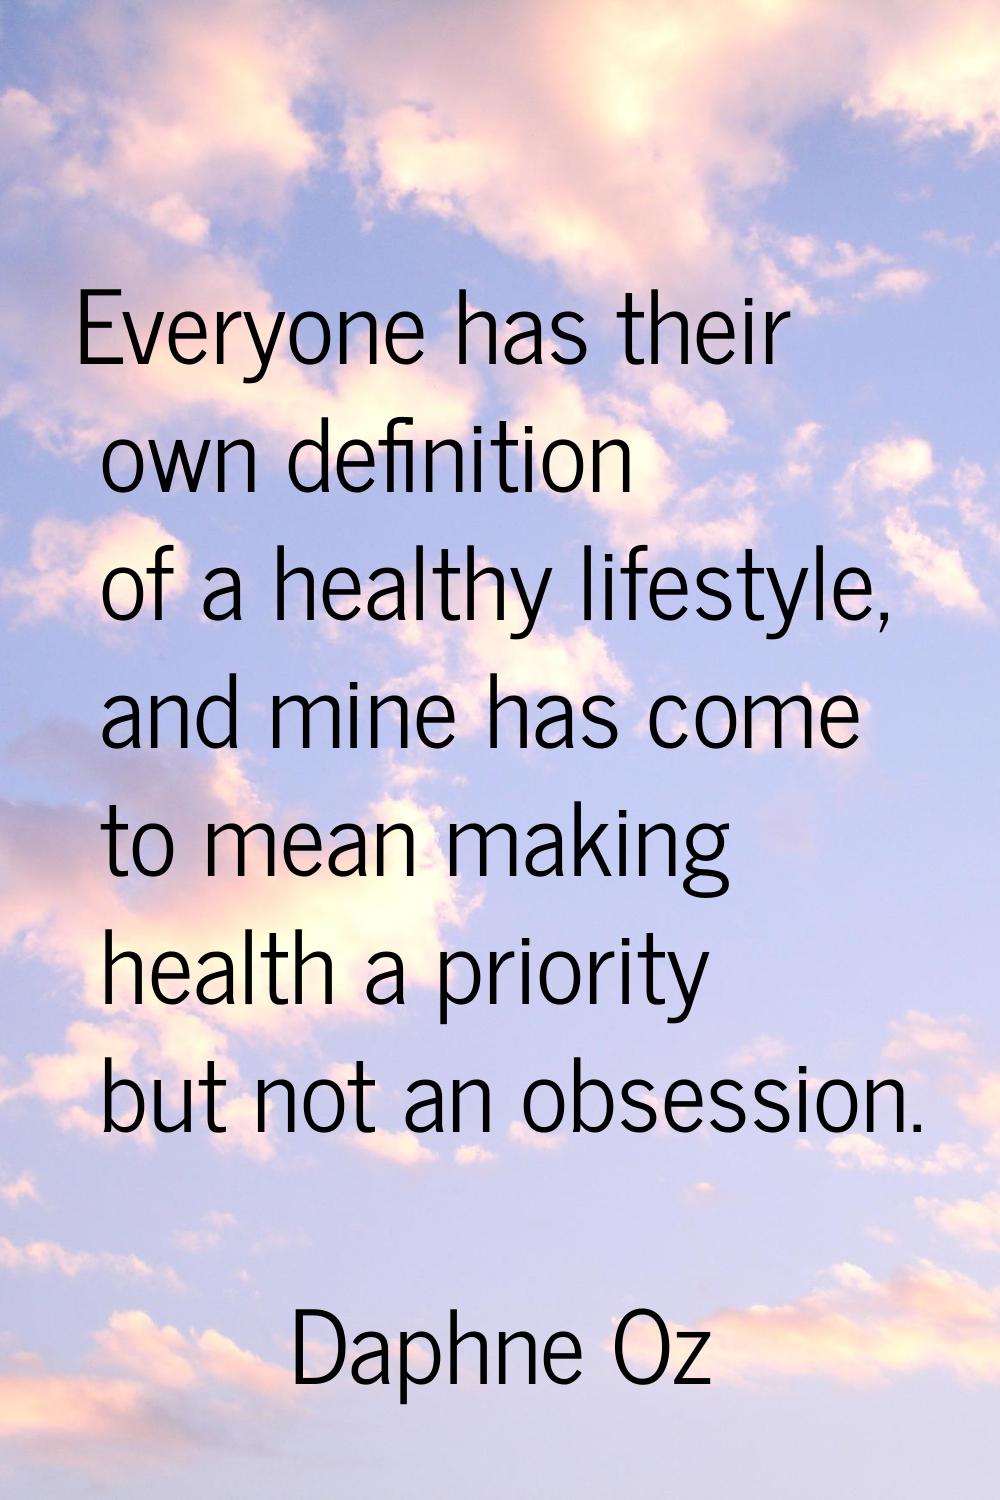 Everyone has their own definition of a healthy lifestyle, and mine has come to mean making health a